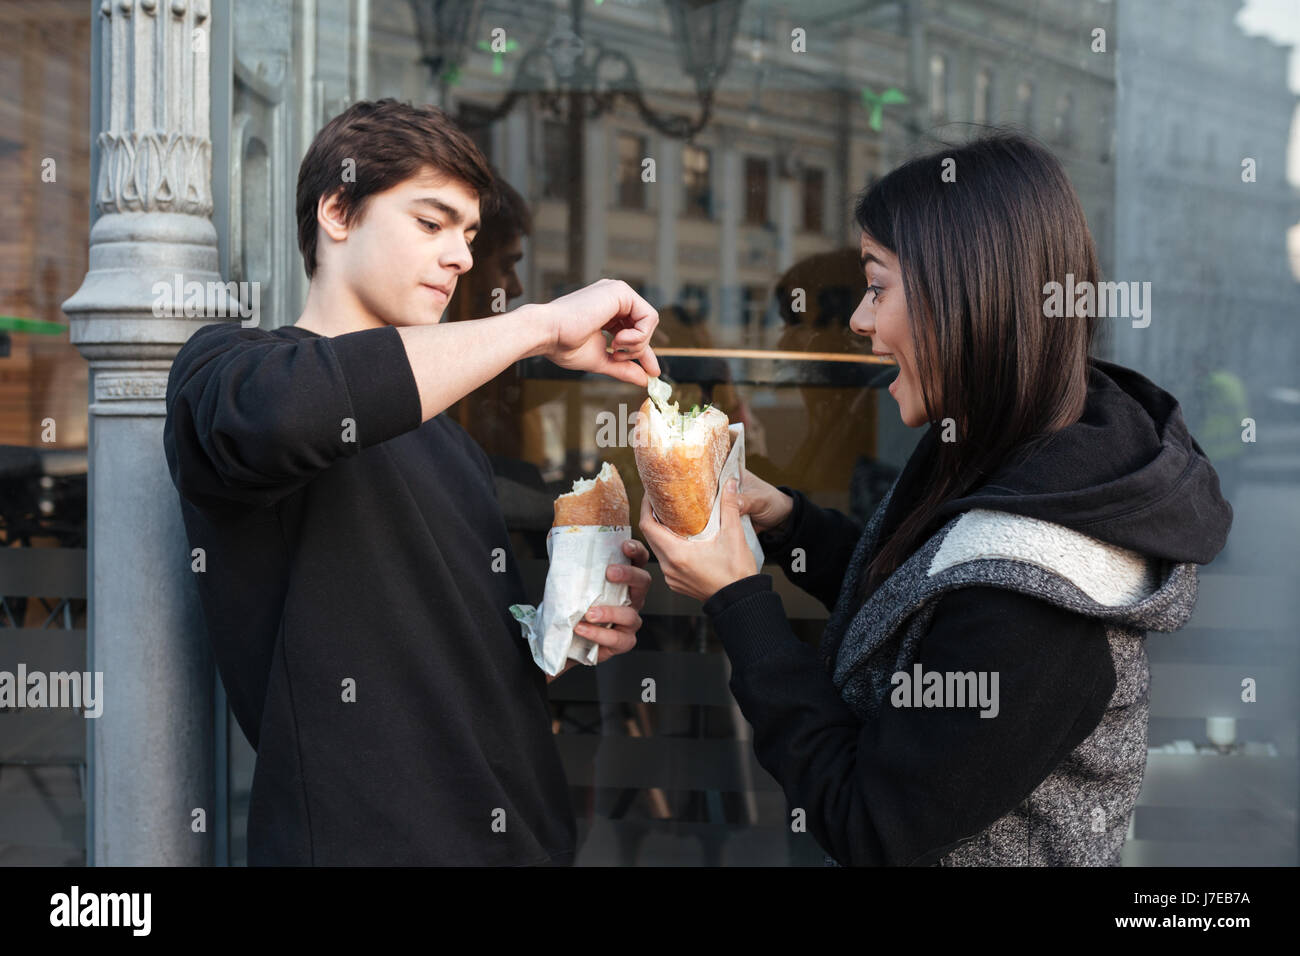 Young man trying to eat burger of his sister near cafe Stock Photo